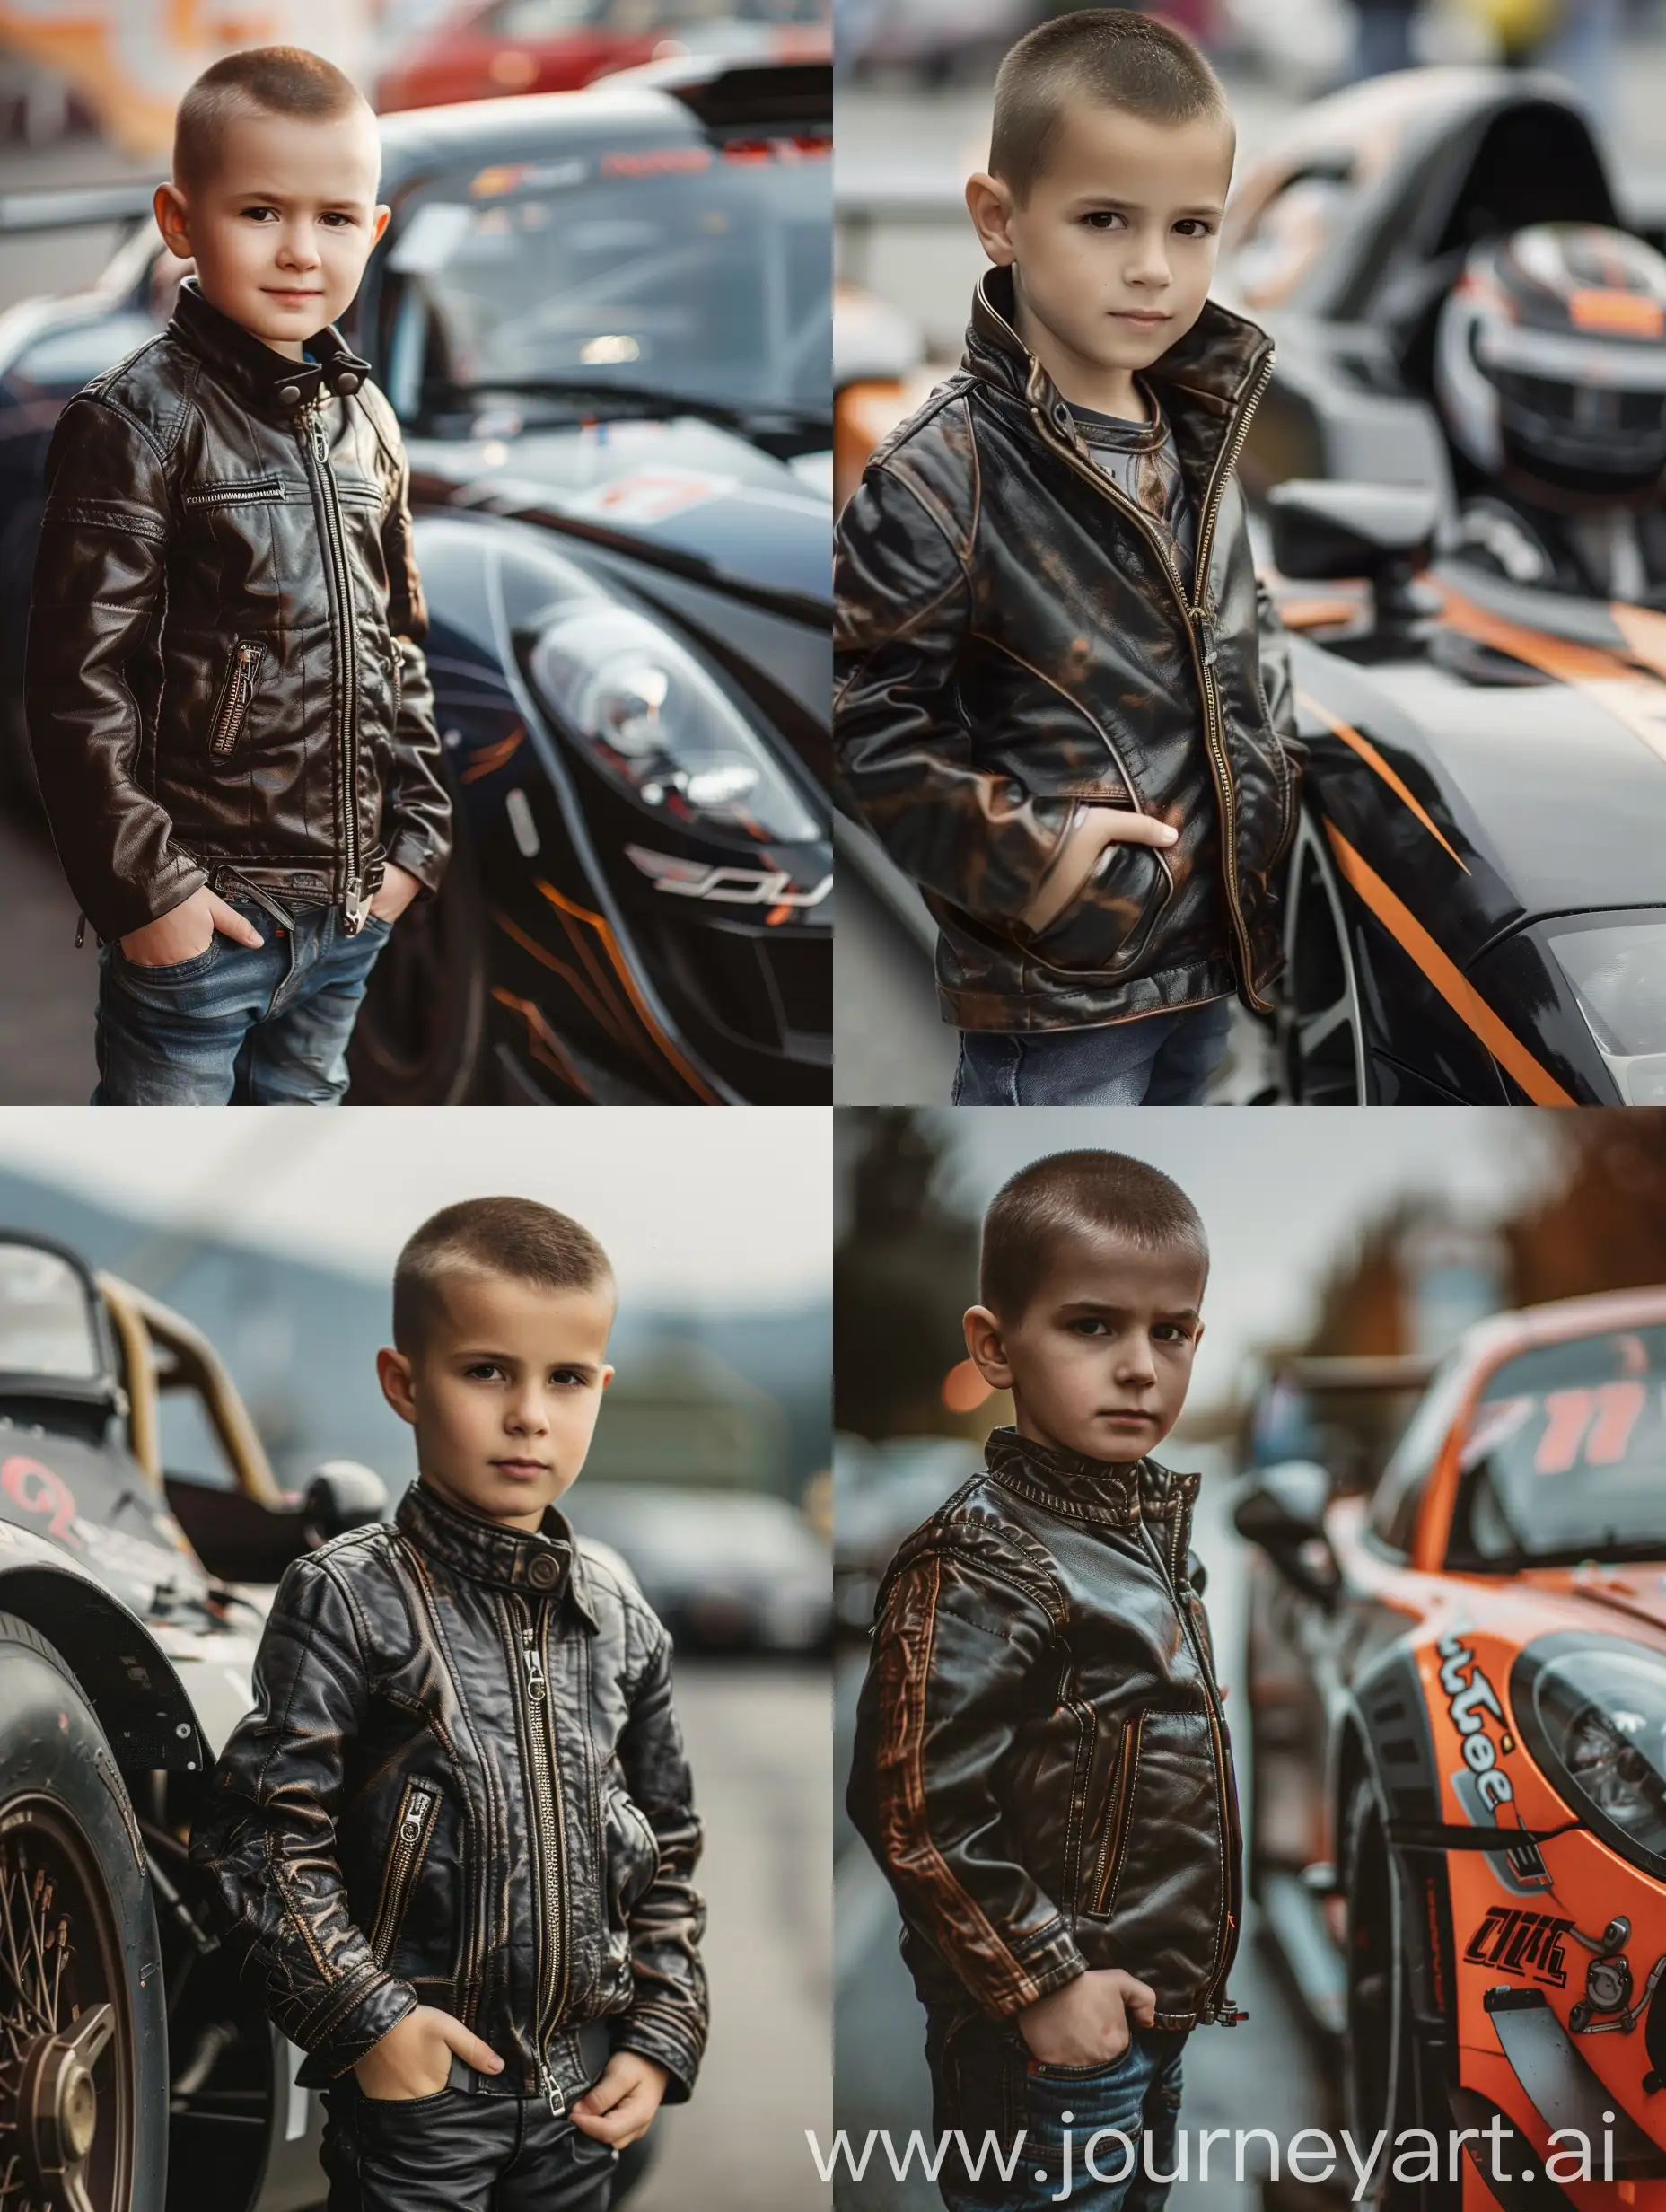 Cool-Street-Racing-Scene-with-Boy-and-Tuned-Car